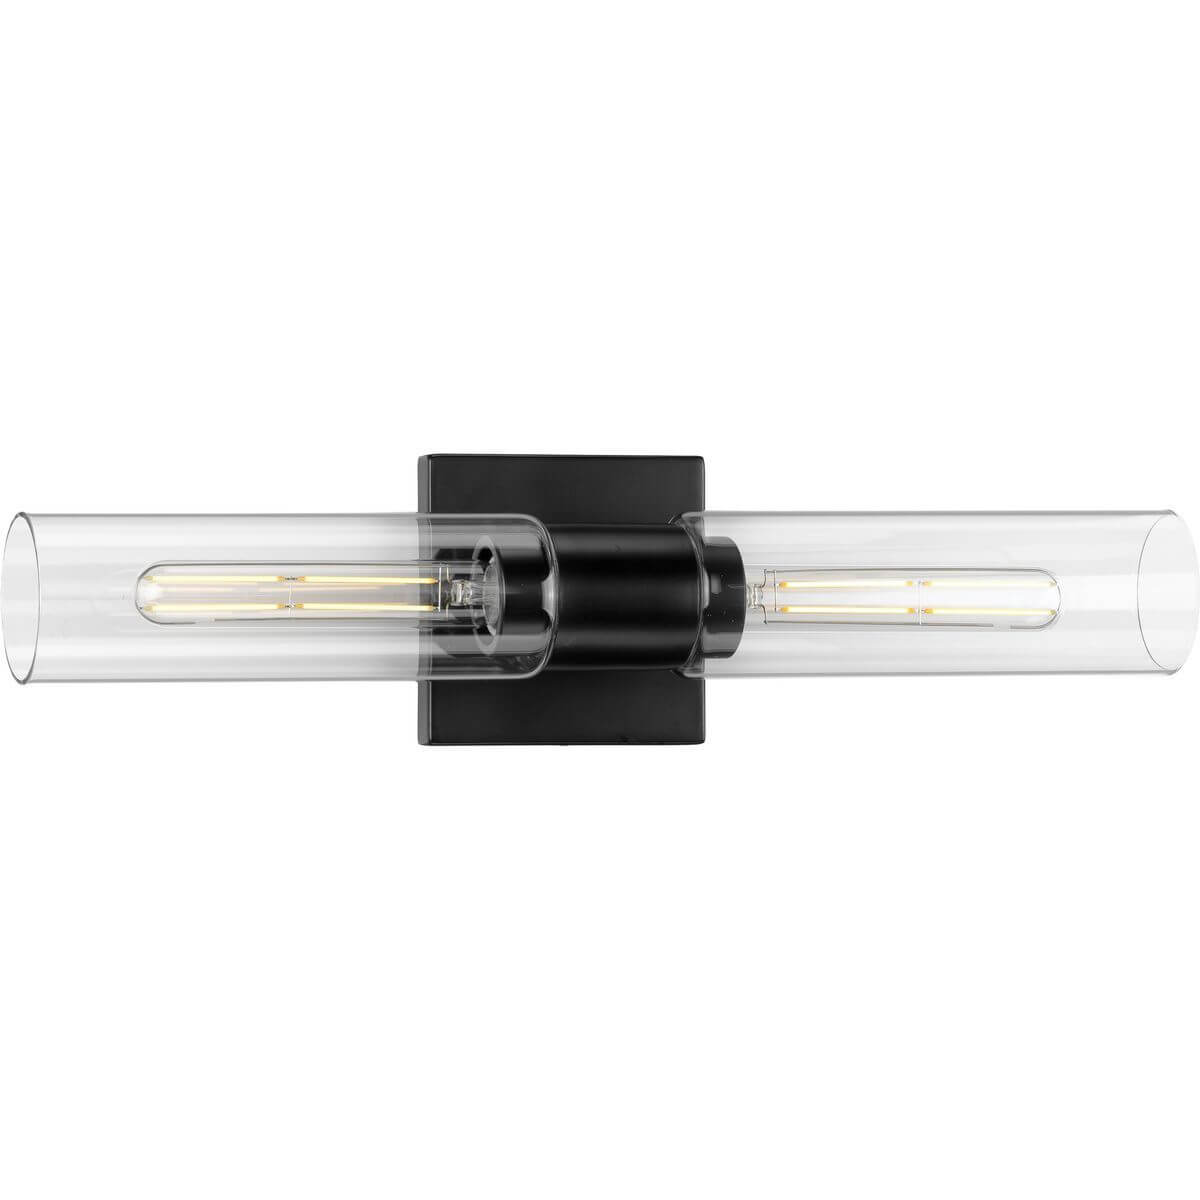 Progress Lighting Clarion 2 Light 20 inch Bath Vanity Light in Matte Black with Clear Glass P300300-031